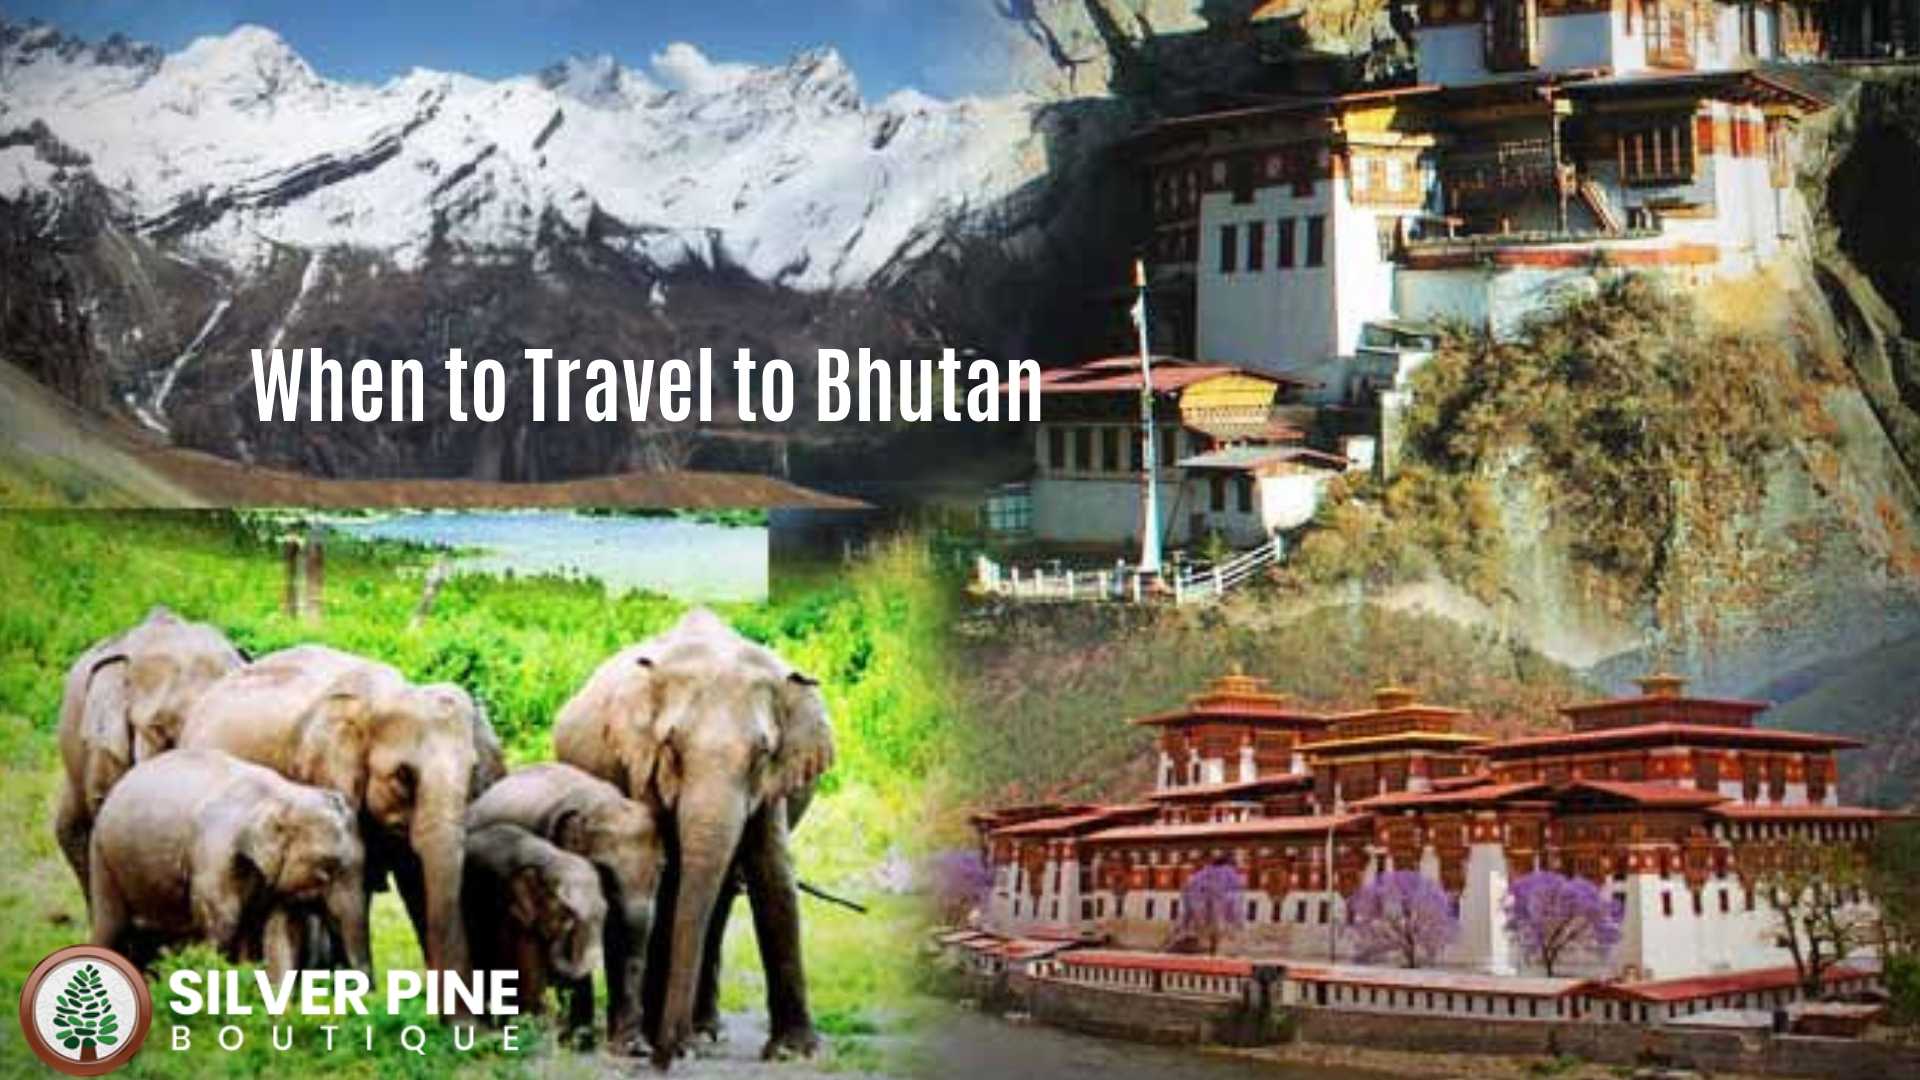 When to Travel to Bhutan